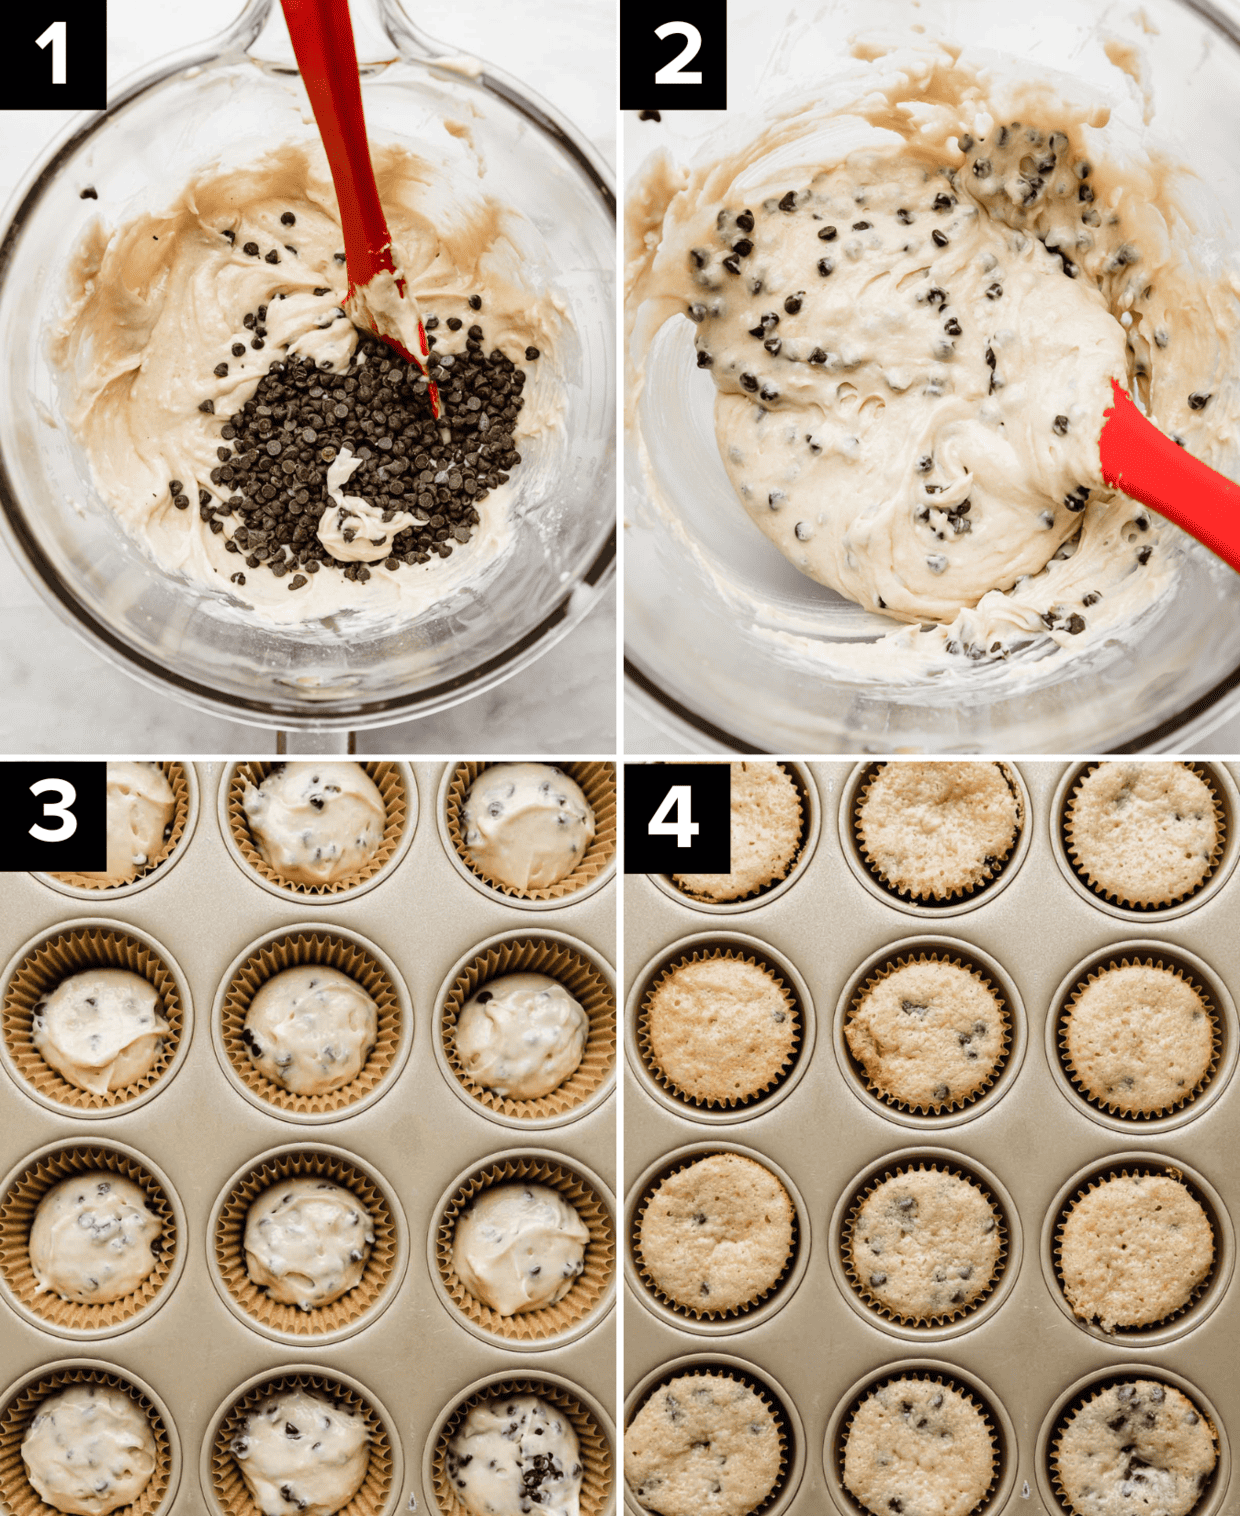 Four photos showing Chocolate Chip Cupcakes batter in a glass bowl, then cupcake liners filled with the batter and then baked.